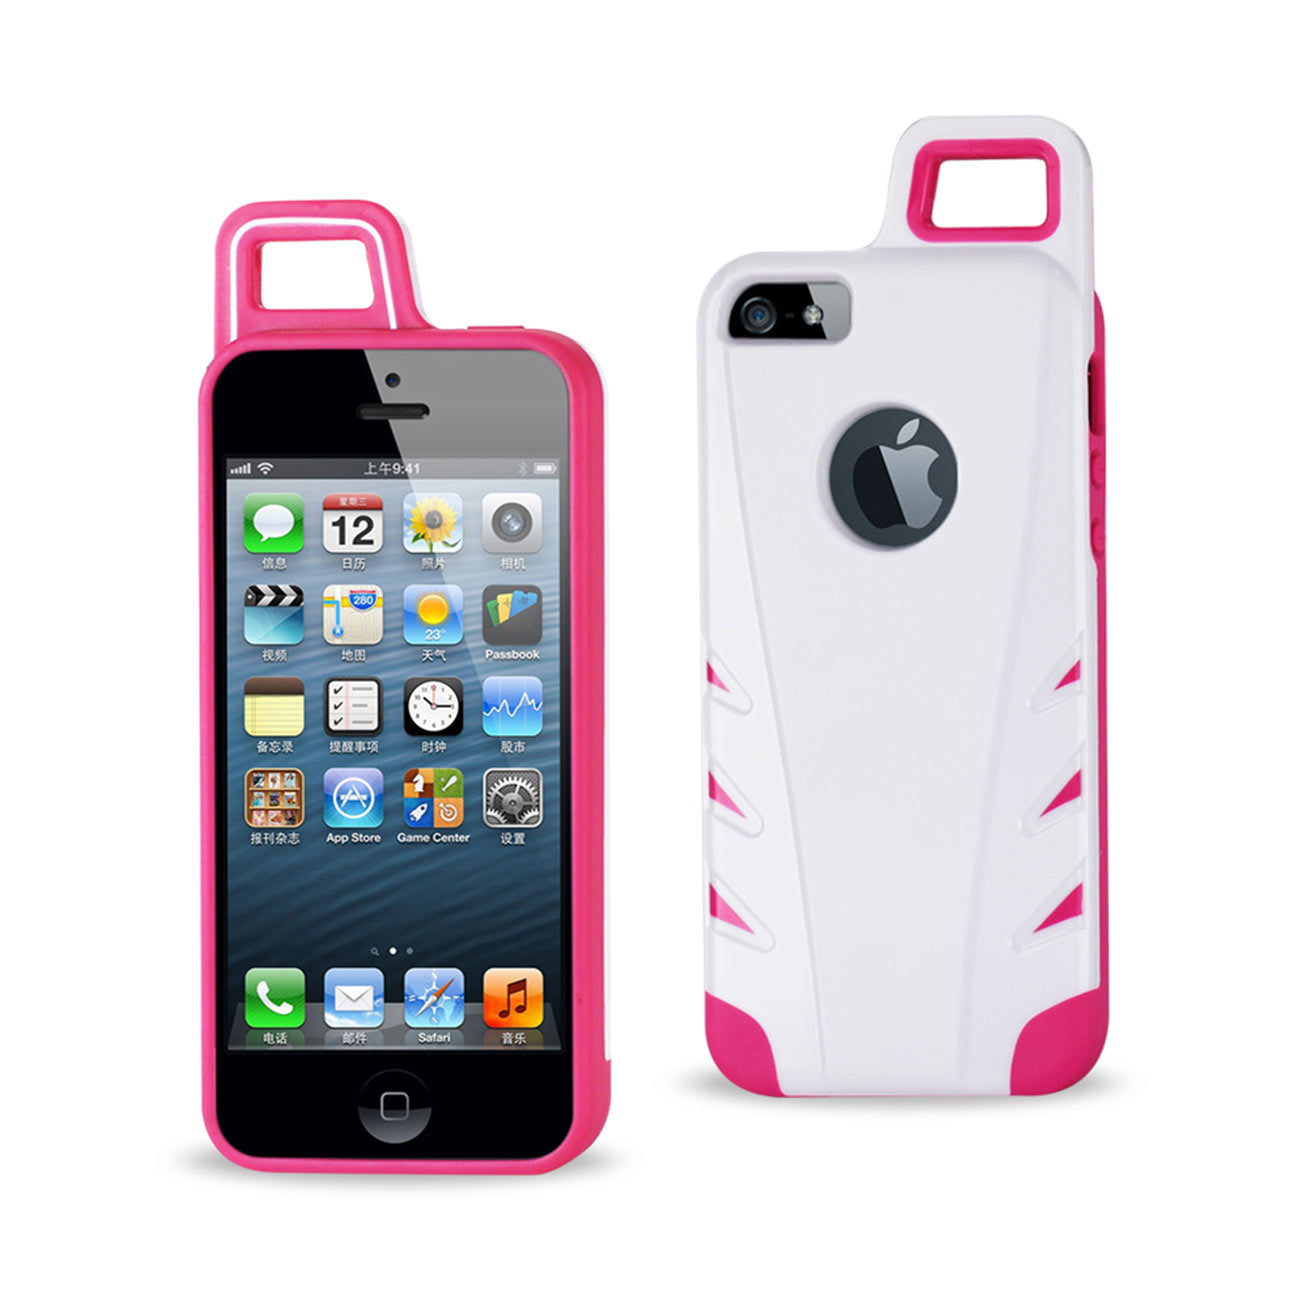 Case Hybrid Drop Proof Workout With Hook iPhone 5/ 5S/ SE White Pink Color